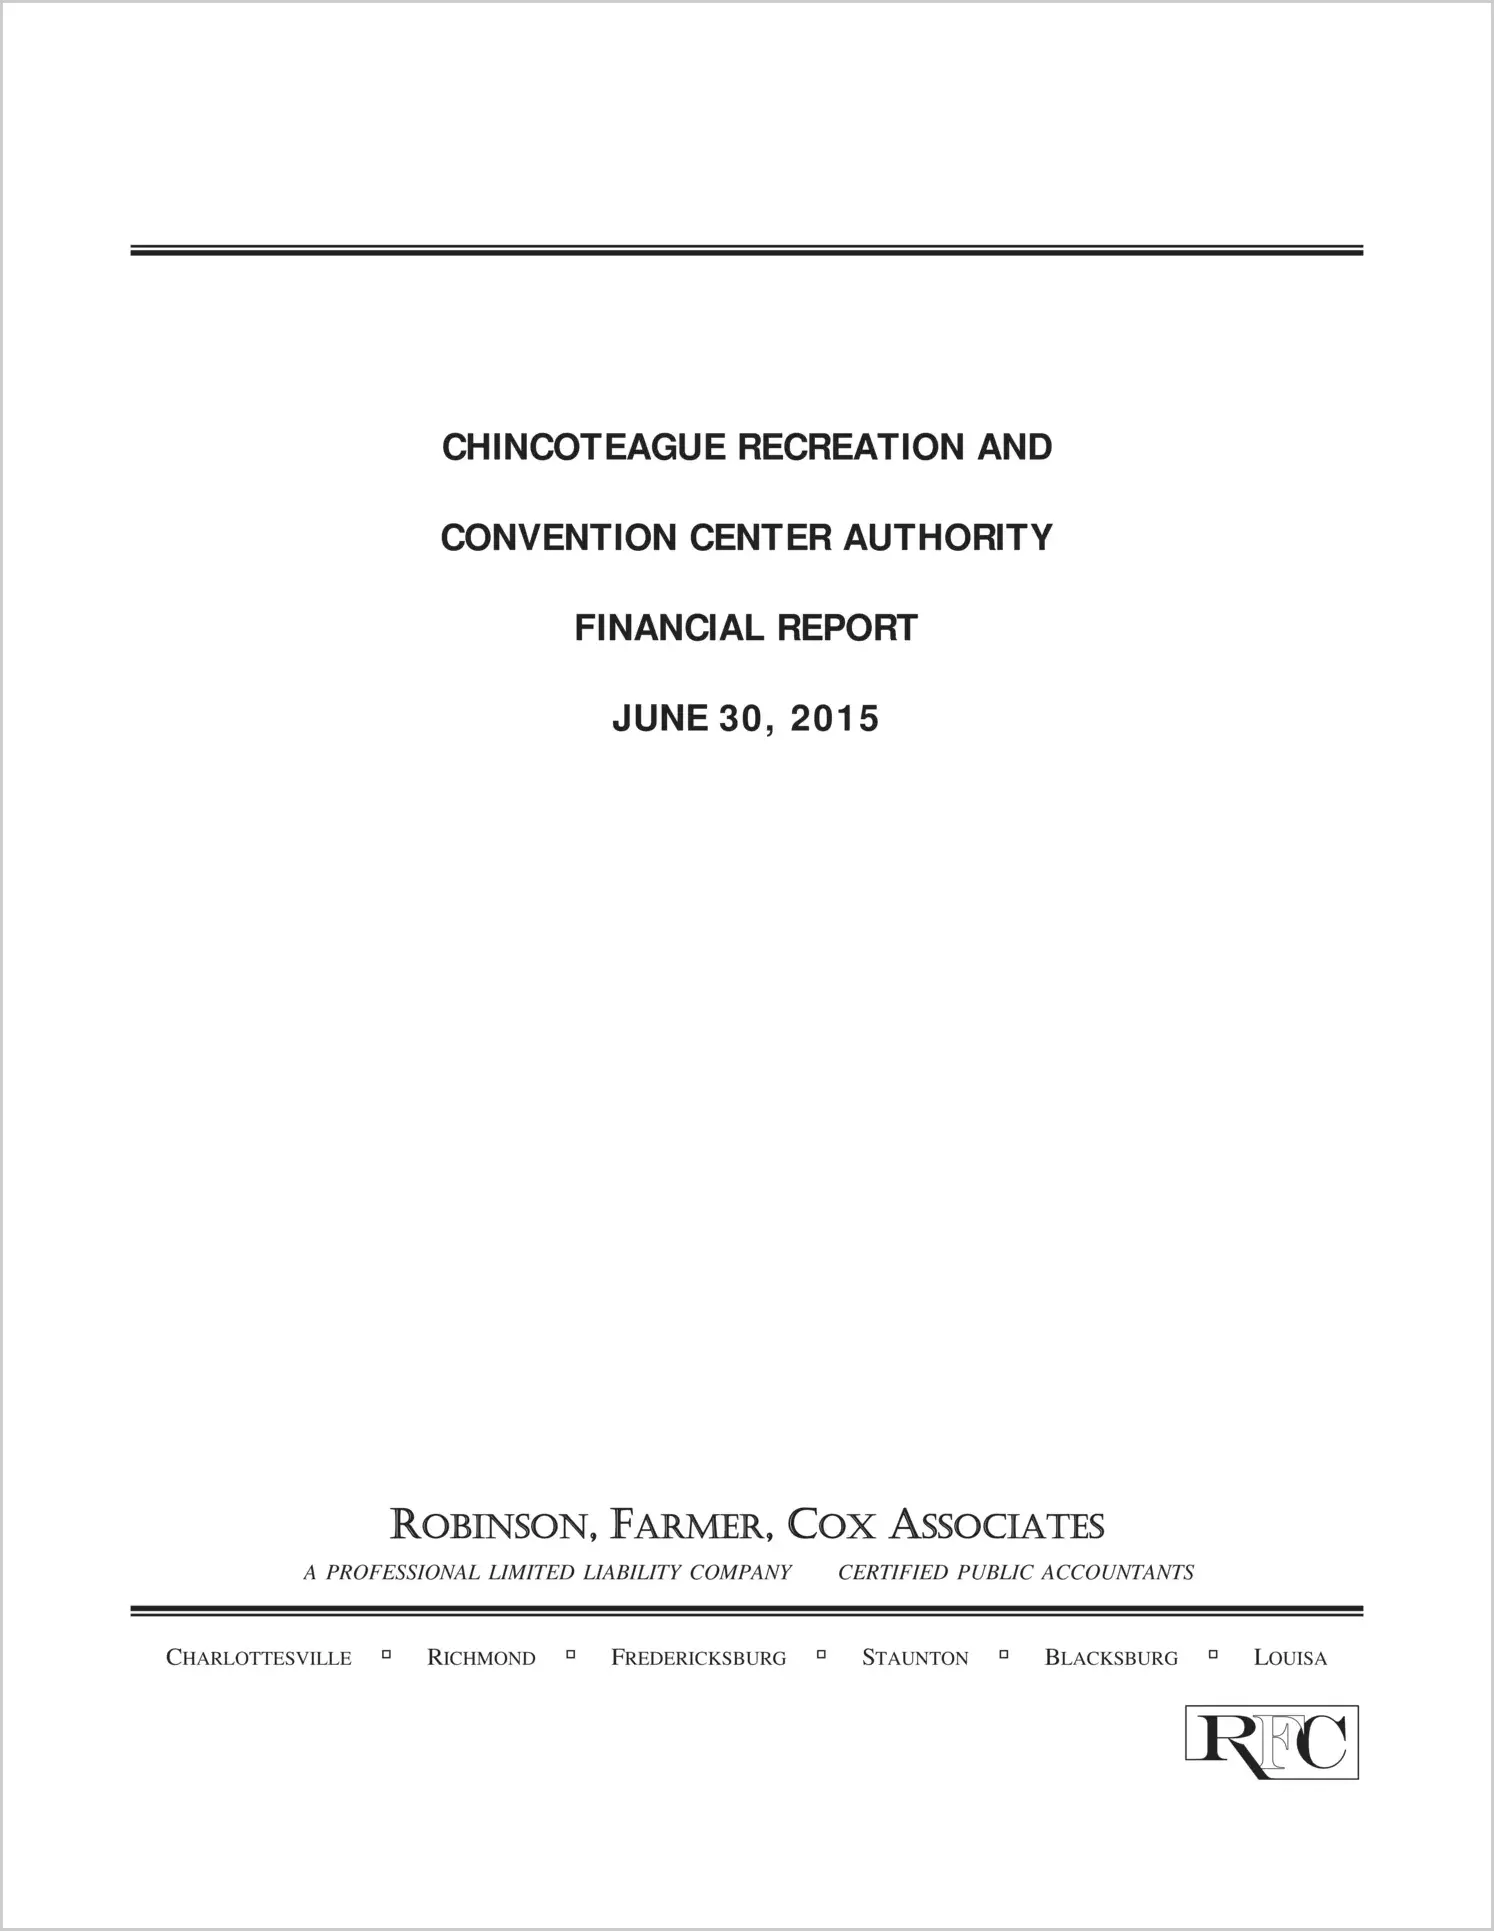 2015 ABC/Other Annual Financial Report  for Chincoteague Rec-Convention Center Authority